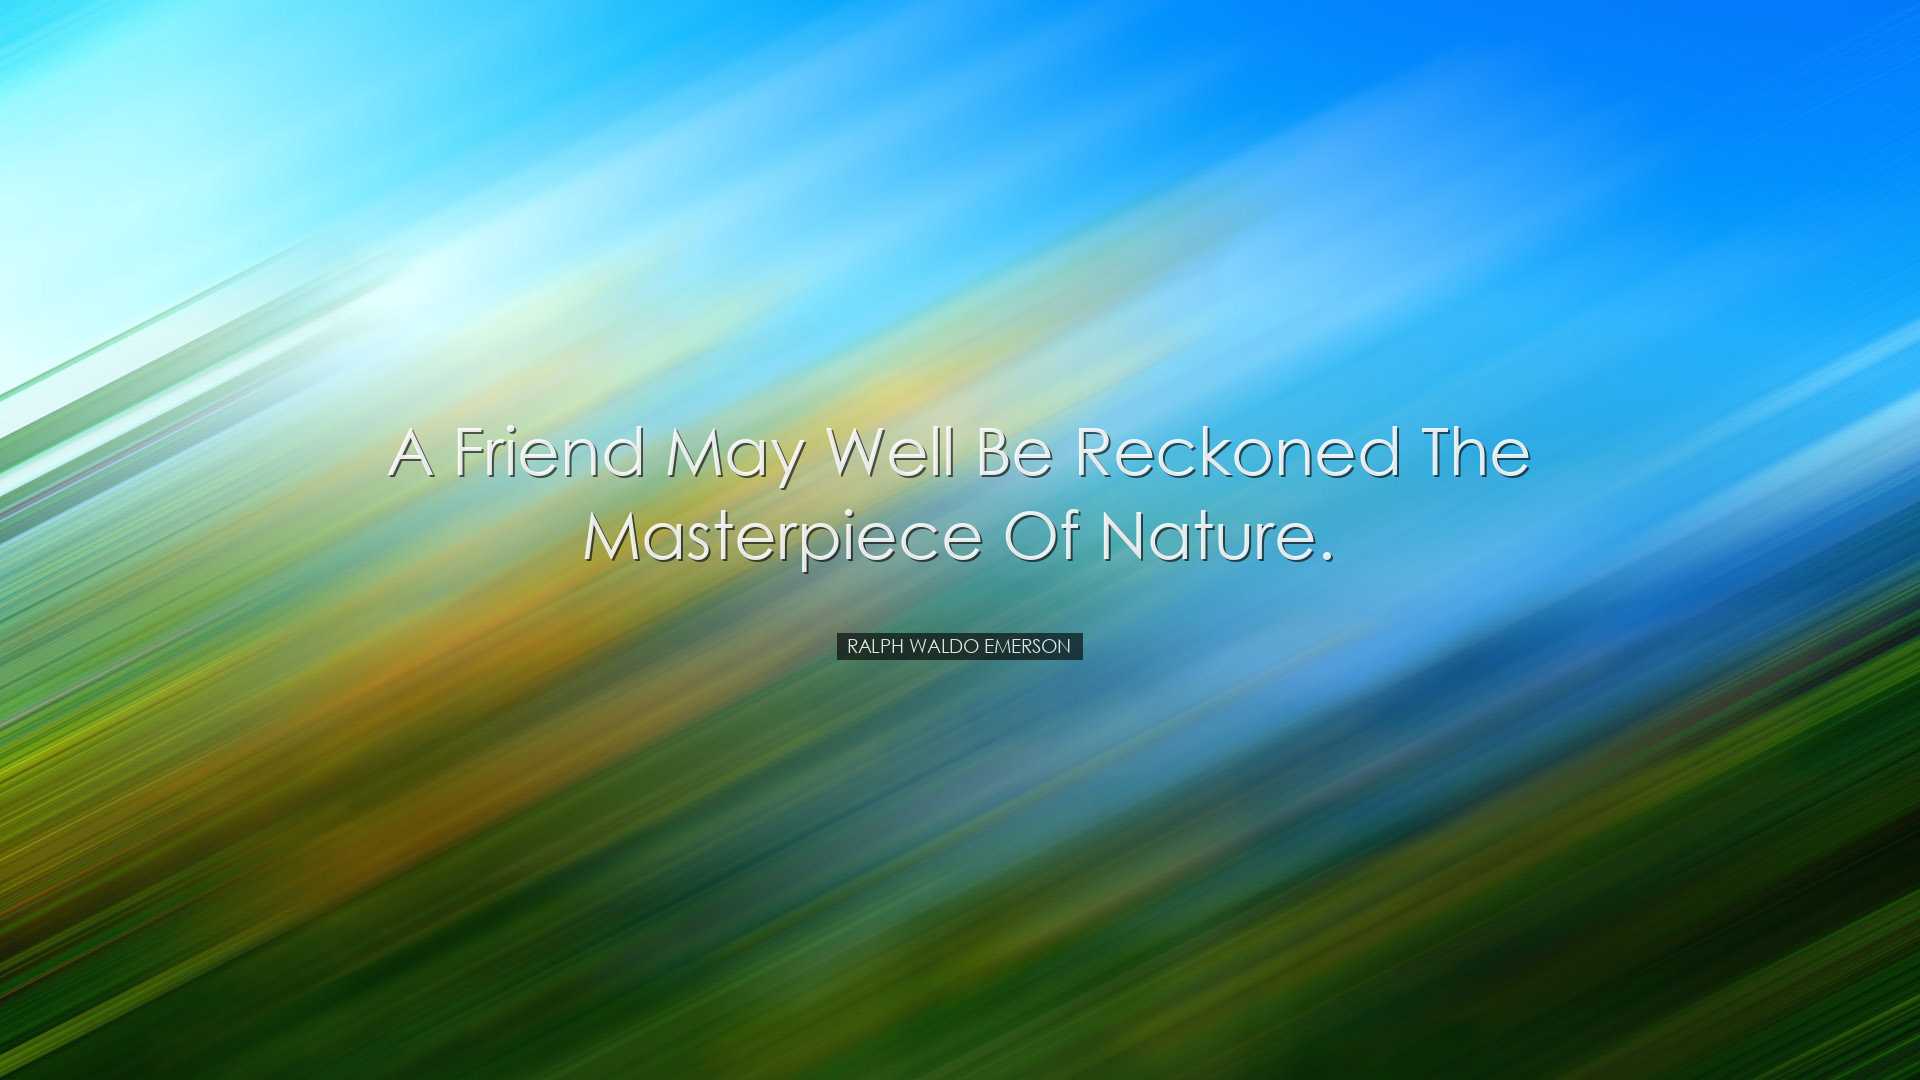 A friend may well be reckoned the masterpiece of nature. - Ralph W